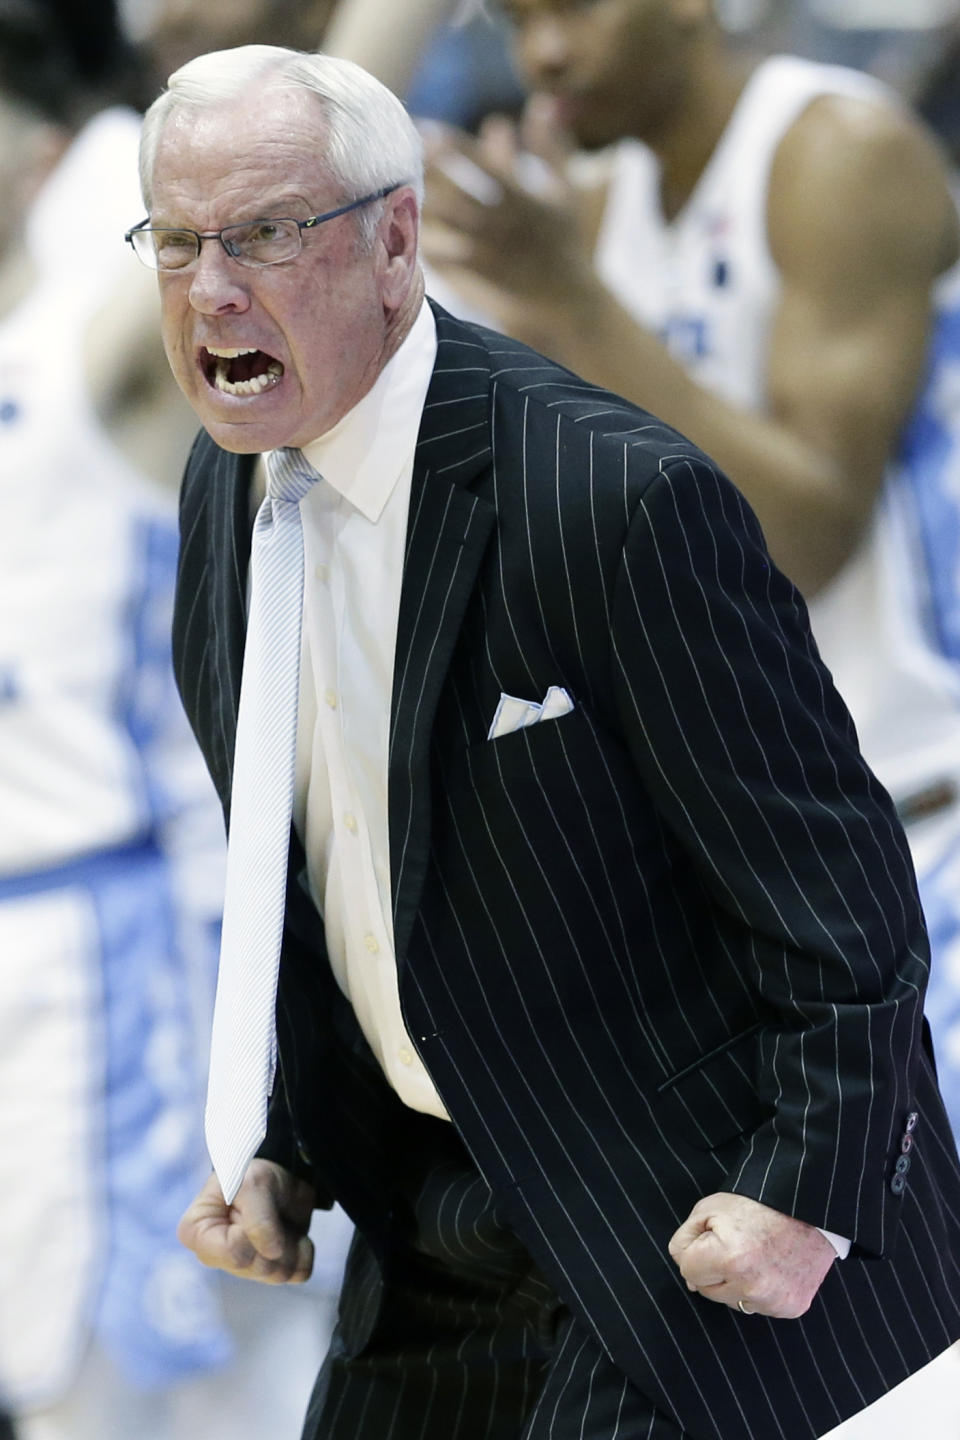 FILE - In this March 9, 2019, file photo, North Carolina head coach Roy Williams reacts during the second half of an NCAA college basketball game against Duke, in Chapel Hill, N.C. The Hall of Fame coach is leading a team picked to finish second in the Atlantic Coast Conference. (AP Photo/Gerry Broome, File)